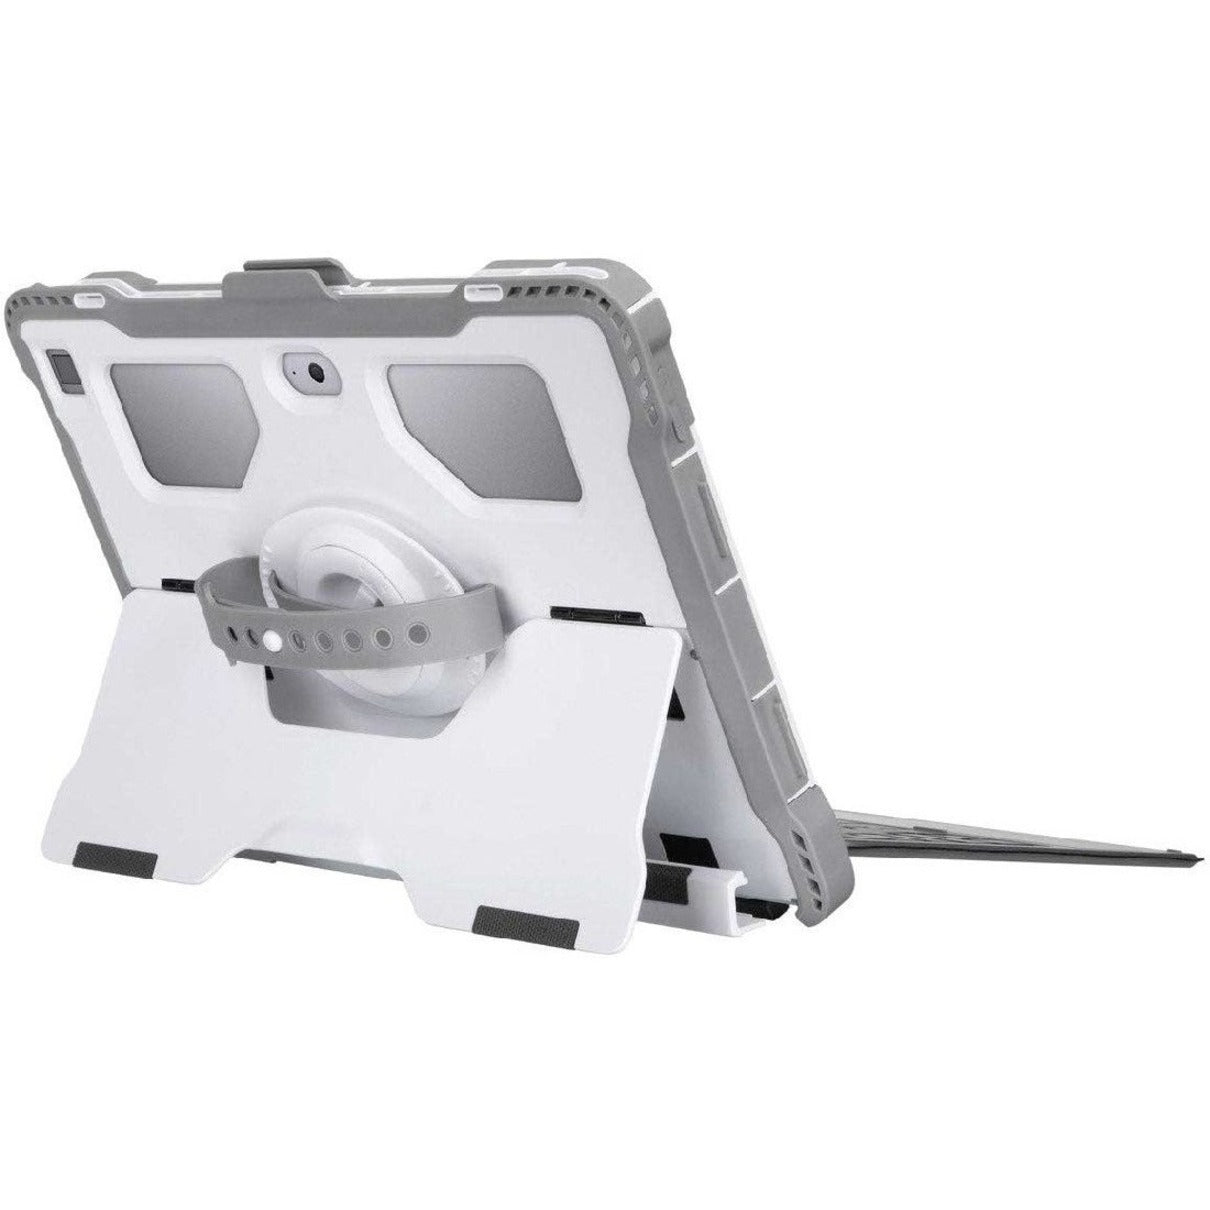 Targus THZ800GLZ Healthcare Case For Dell Latitude 7210/7200 2-in-1, White Carrying Case